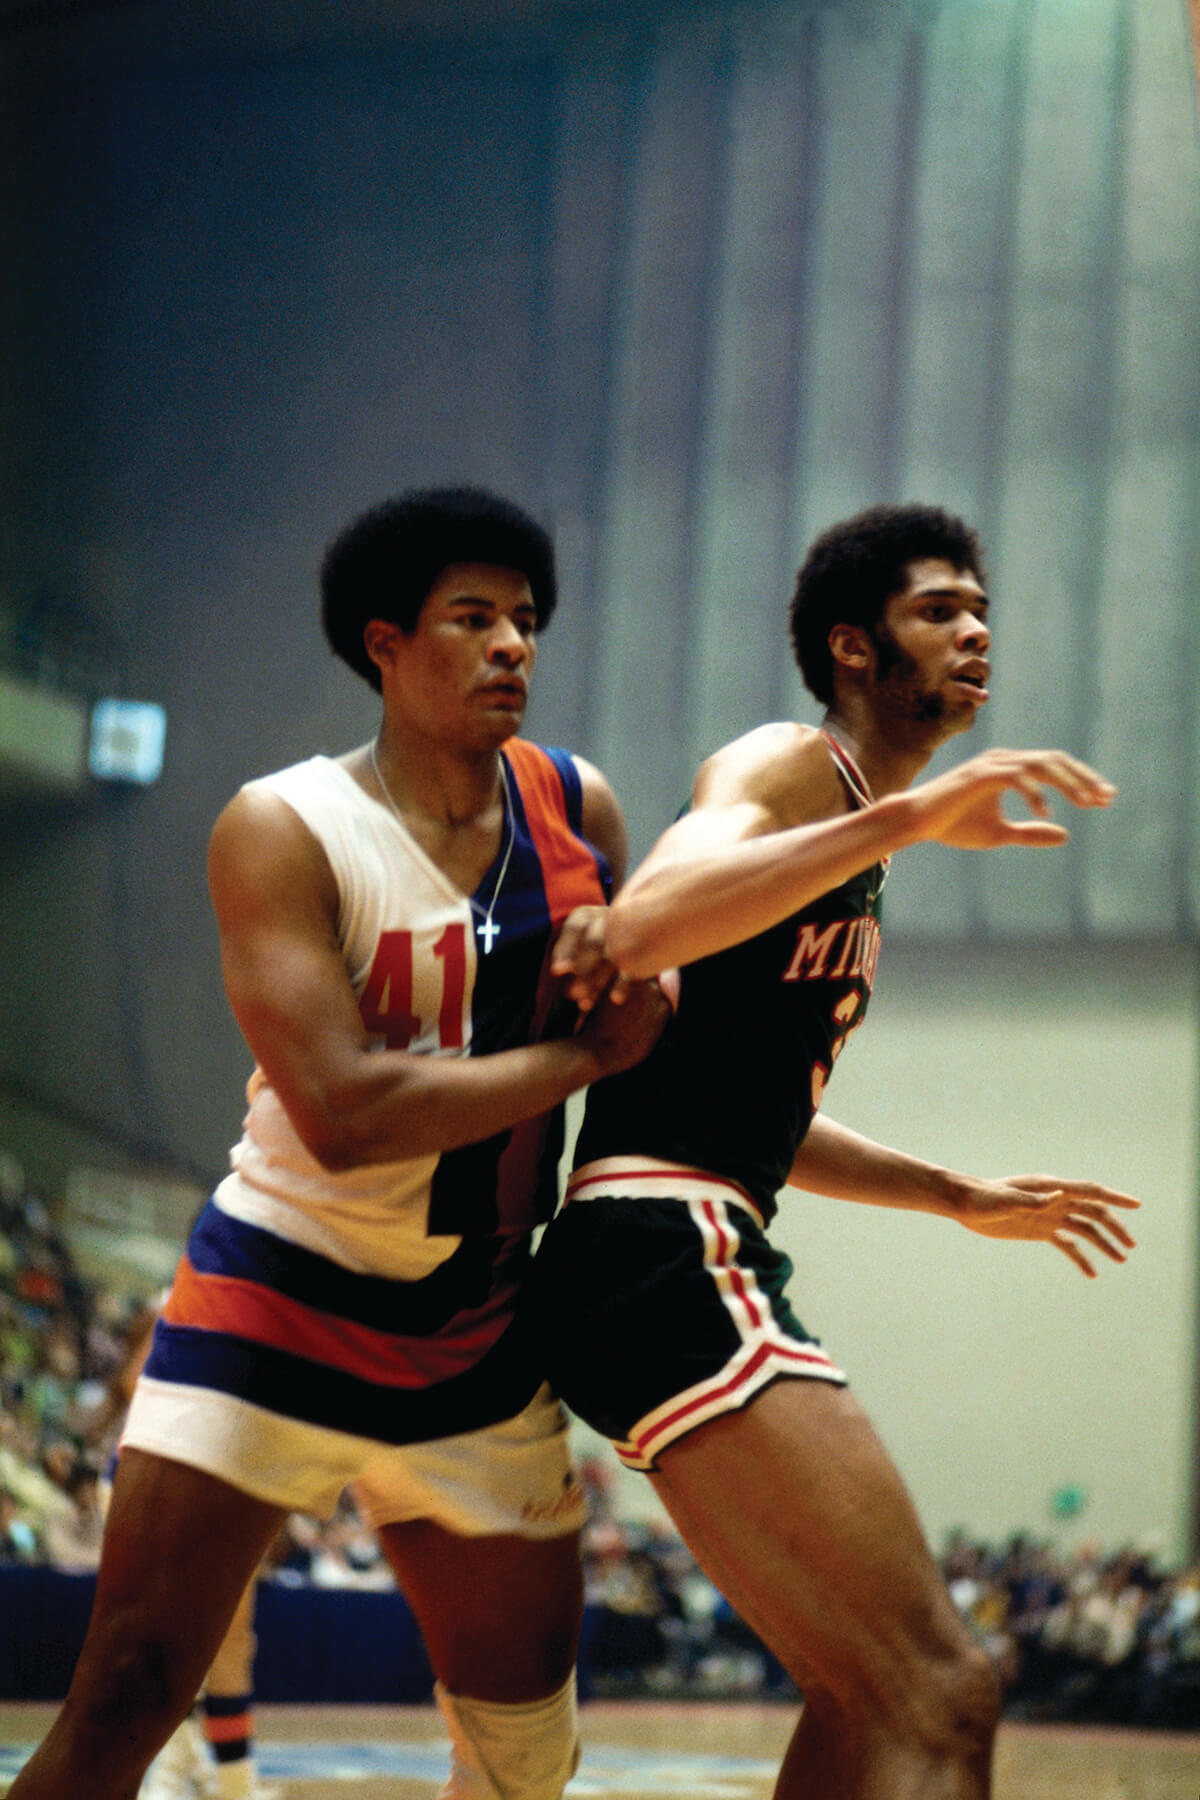 Regardless of His Last Name, Wes Unseld Jr. Had to Pay His Dues in the NBA